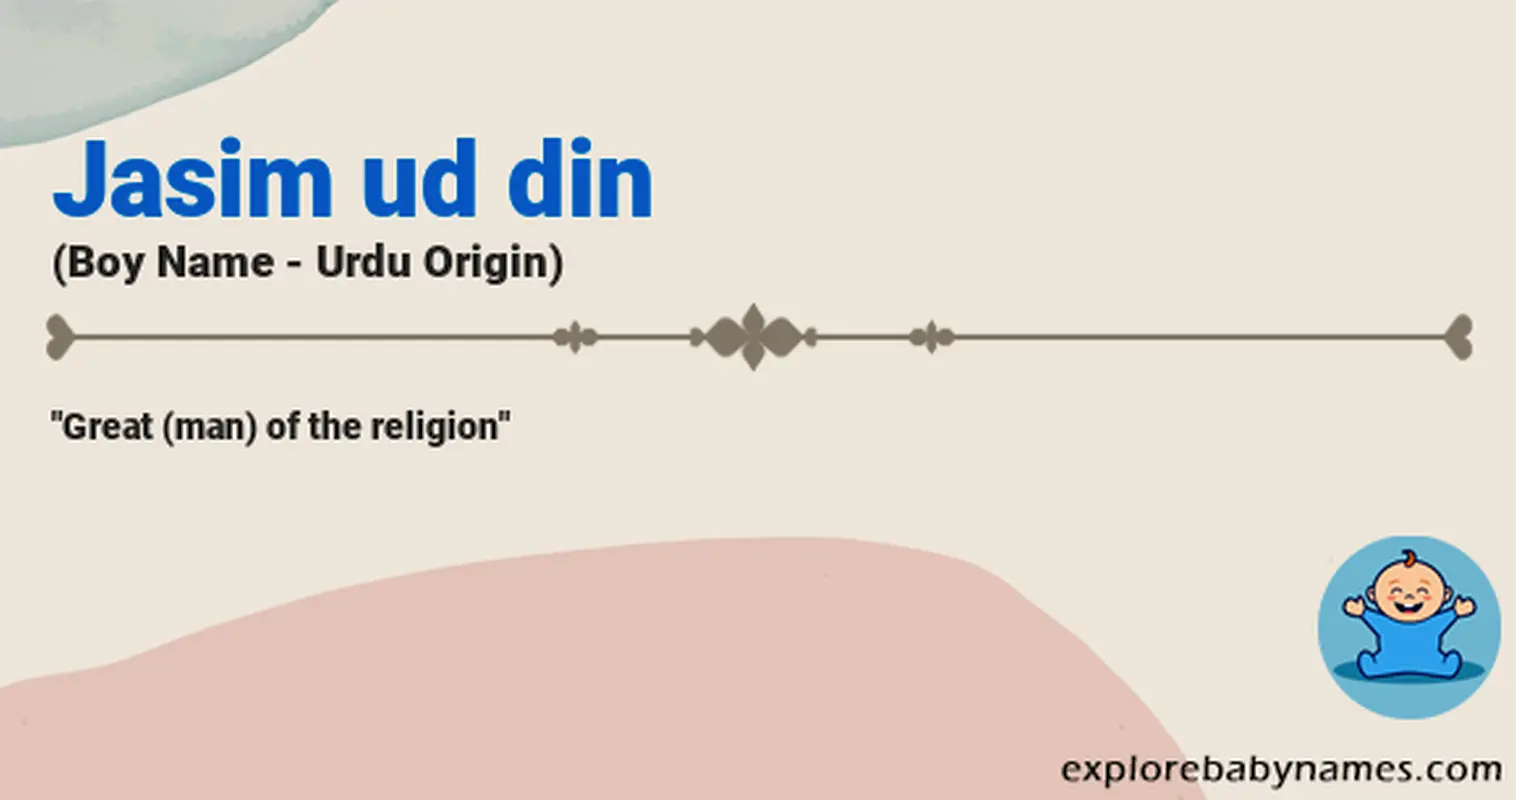 Meaning of Jasim ud din